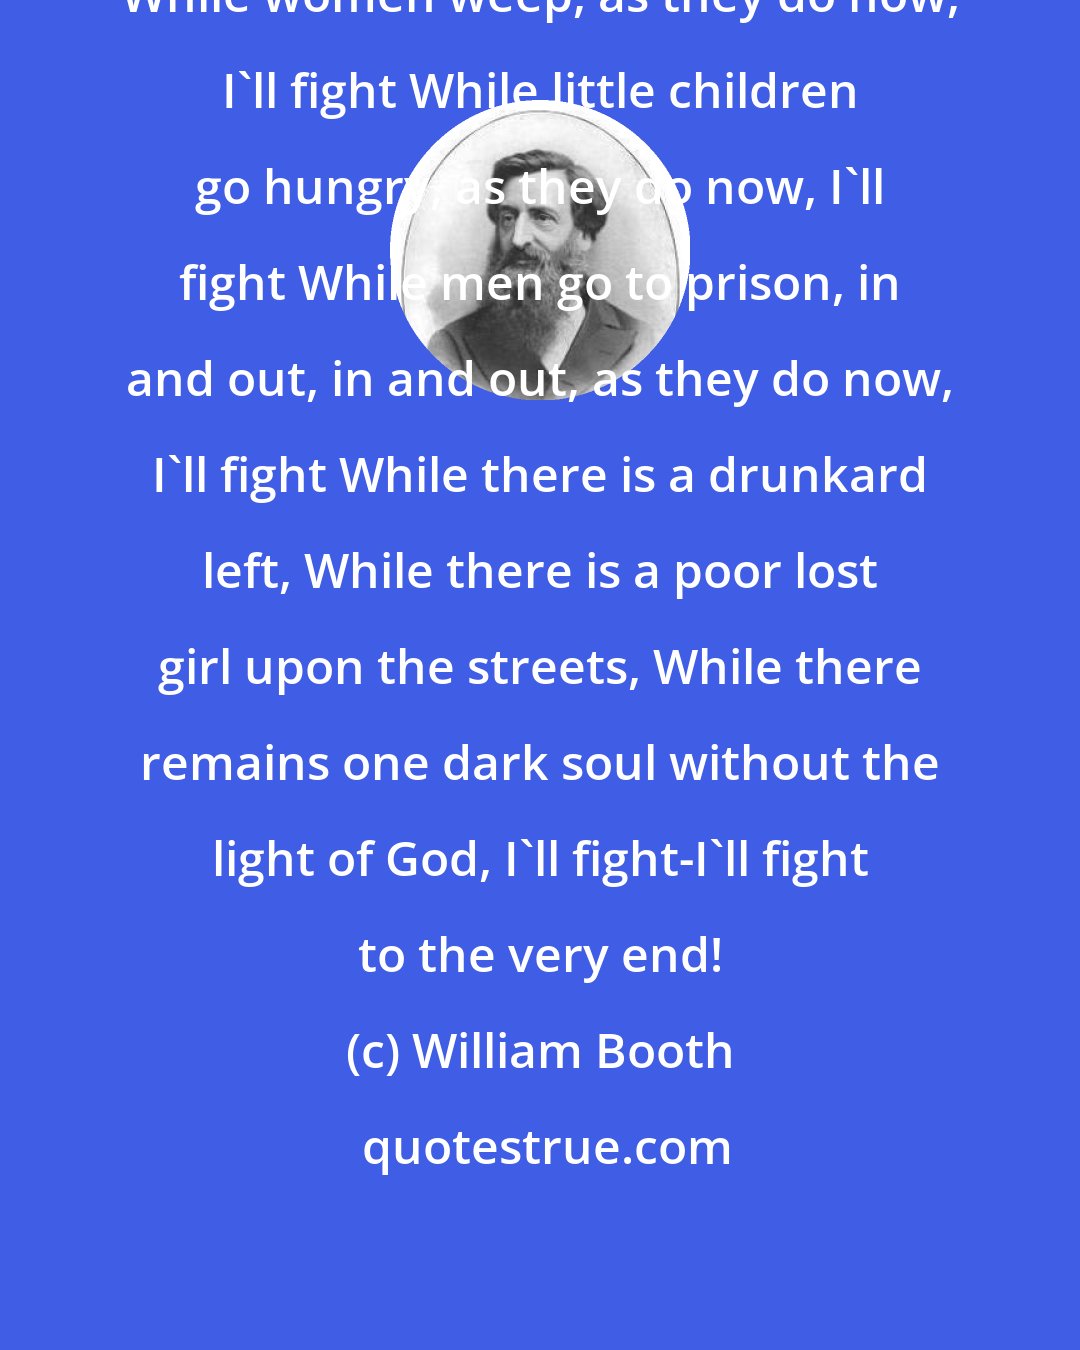 William Booth: While women weep, as they do now, I'll fight While little children go hungry, as they do now, I'll fight While men go to prison, in and out, in and out, as they do now, I'll fight While there is a drunkard left, While there is a poor lost girl upon the streets, While there remains one dark soul without the light of God, I'll fight-I'll fight to the very end!